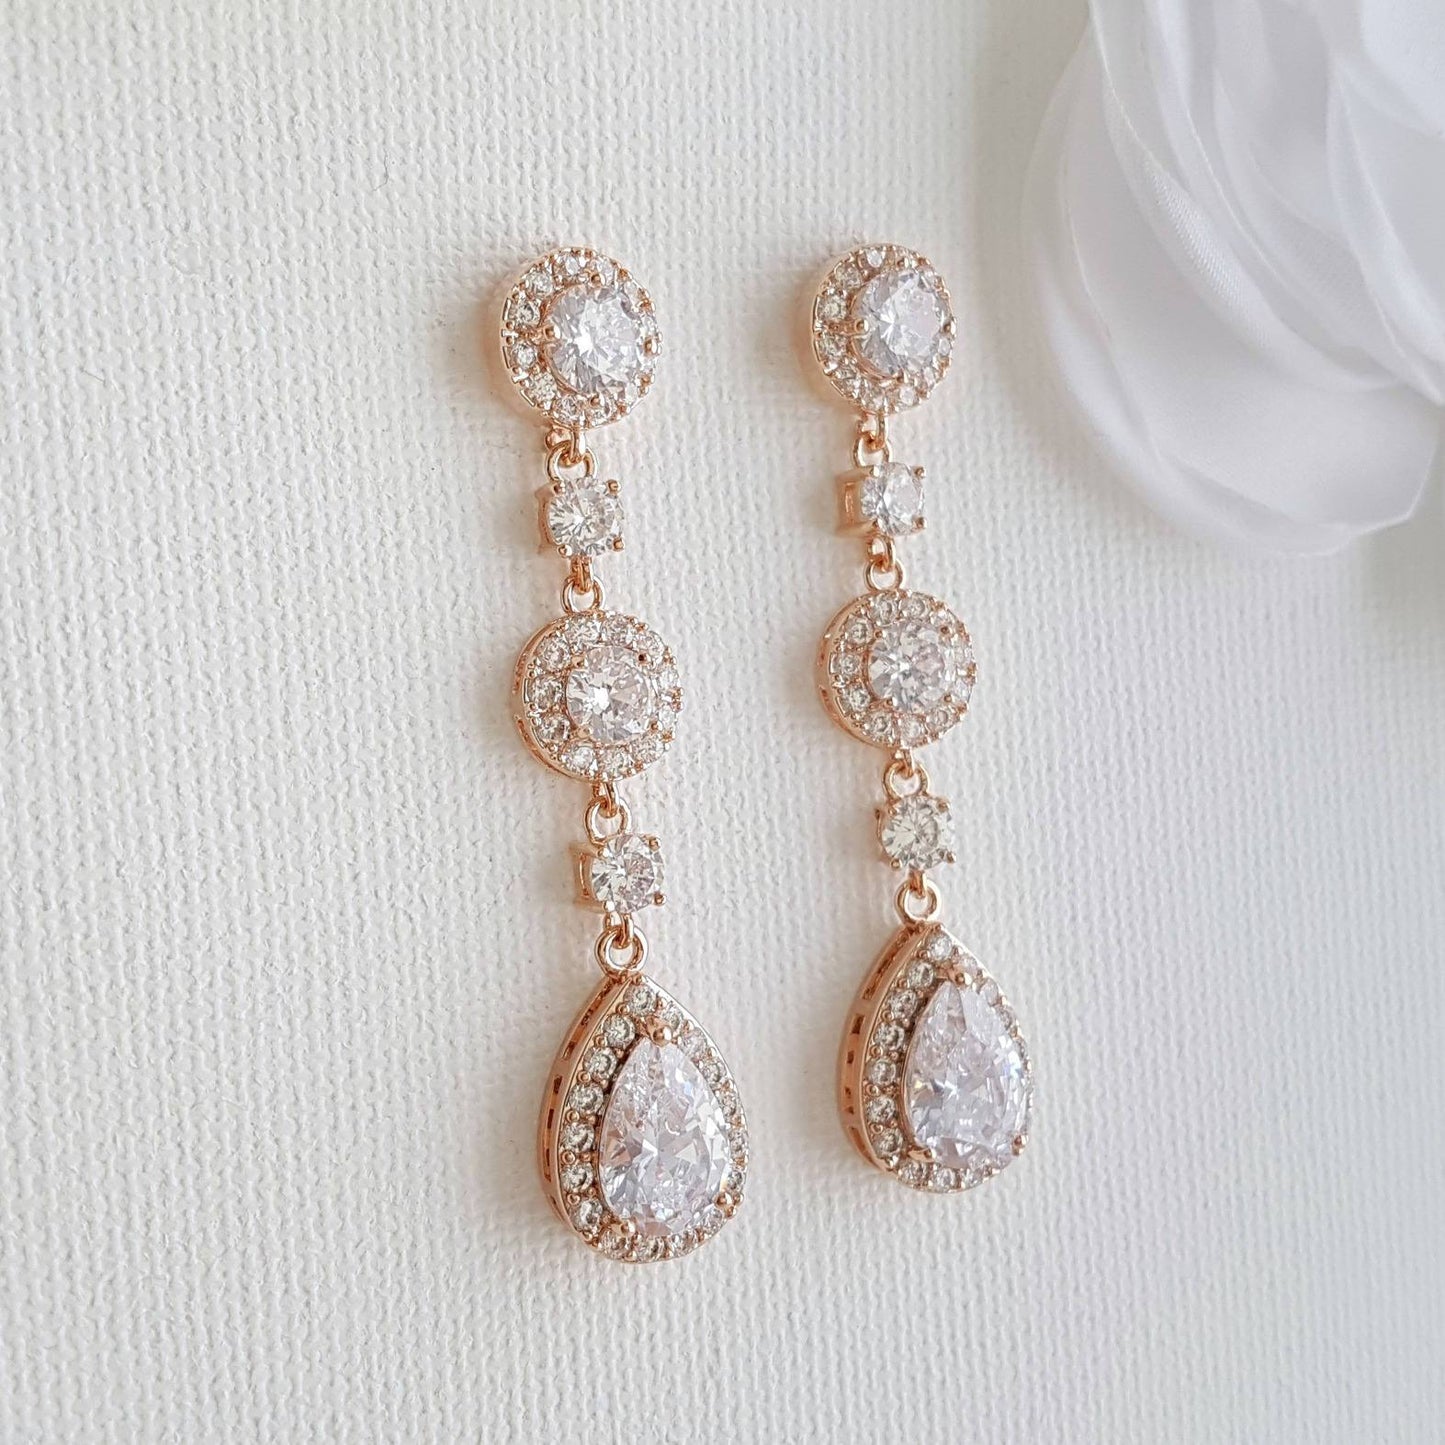 Clip On earrings for Brides in Rose gold